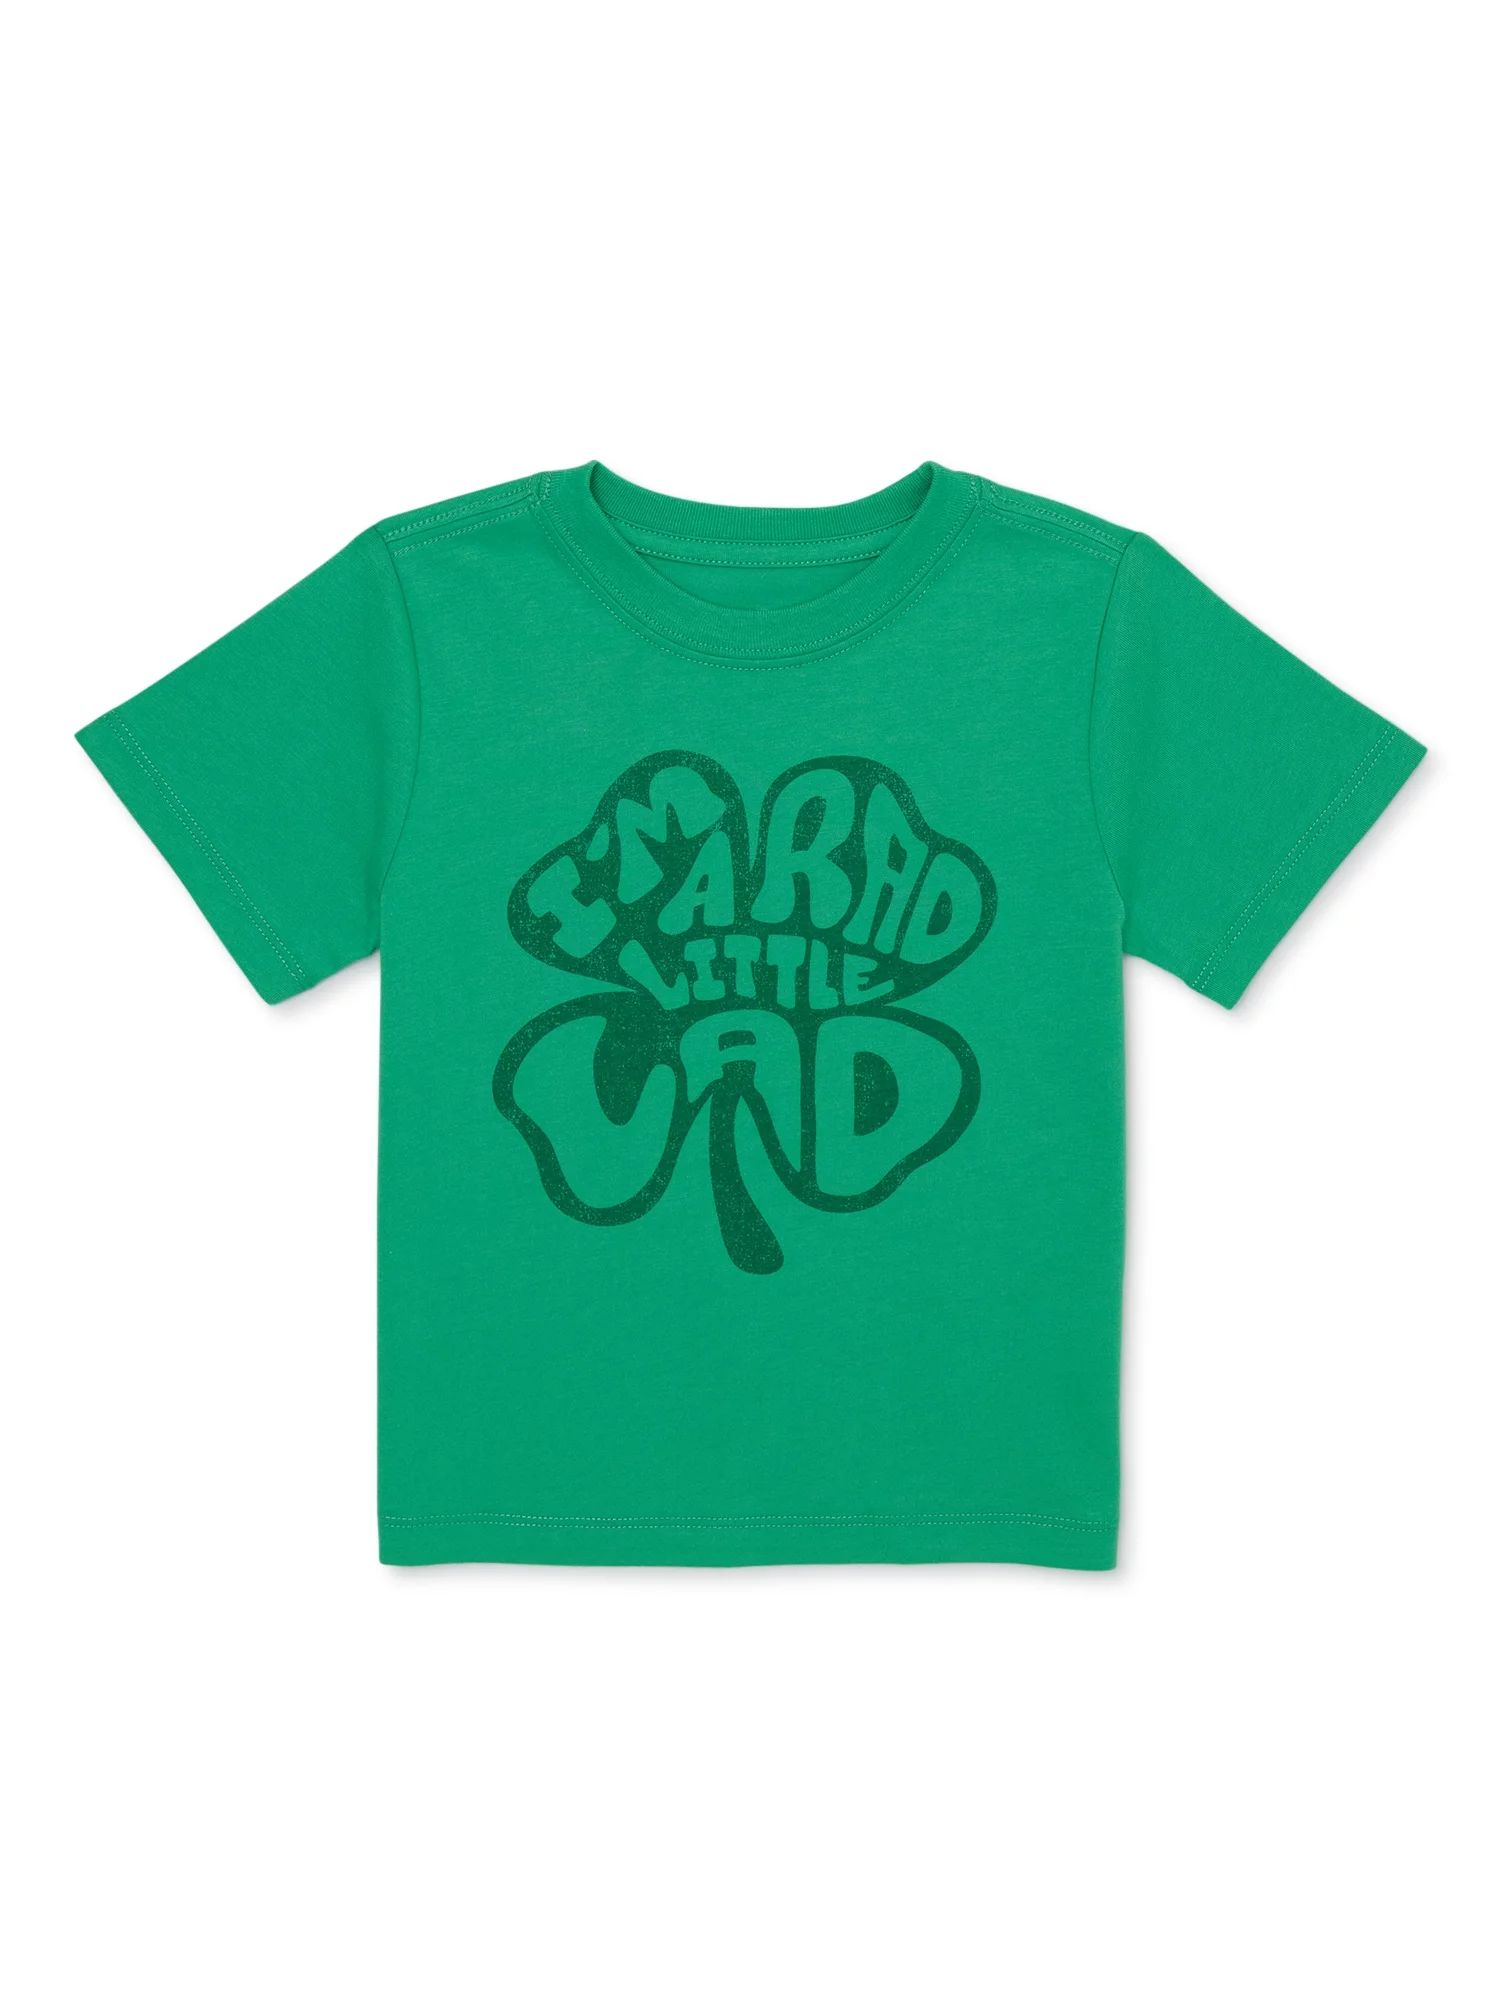 St Patrick's Day Baby and Toddler Boys Short Sleeve Graphic Tee, Sizes 12 Months-5T | Walmart (US)